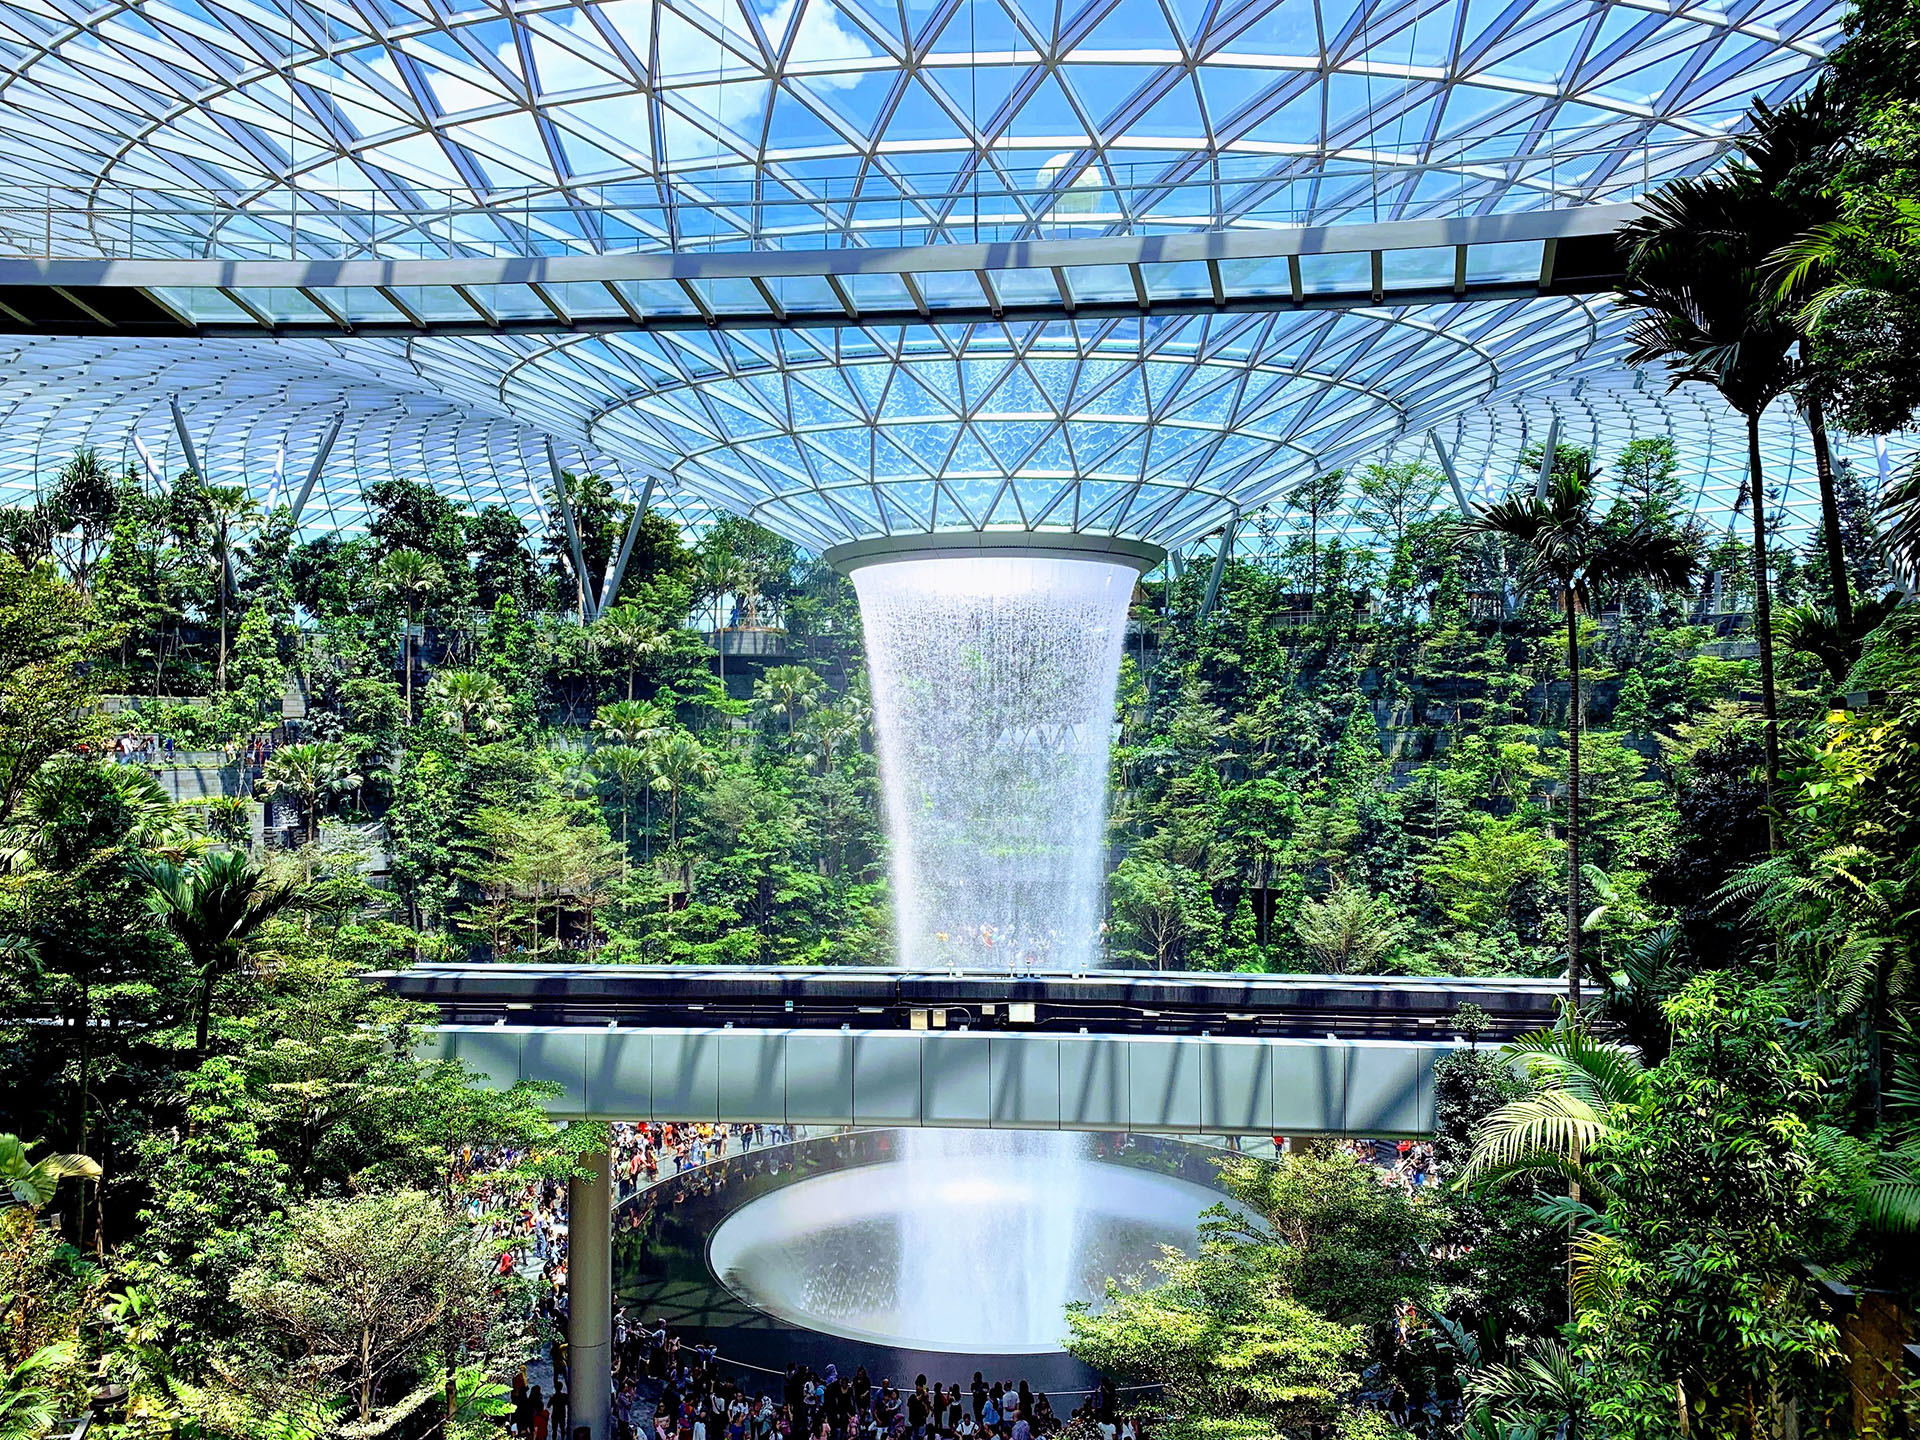 Changi Airport Wins Best Airport In The World Title; Results Announced In An Online Awards Ceremony